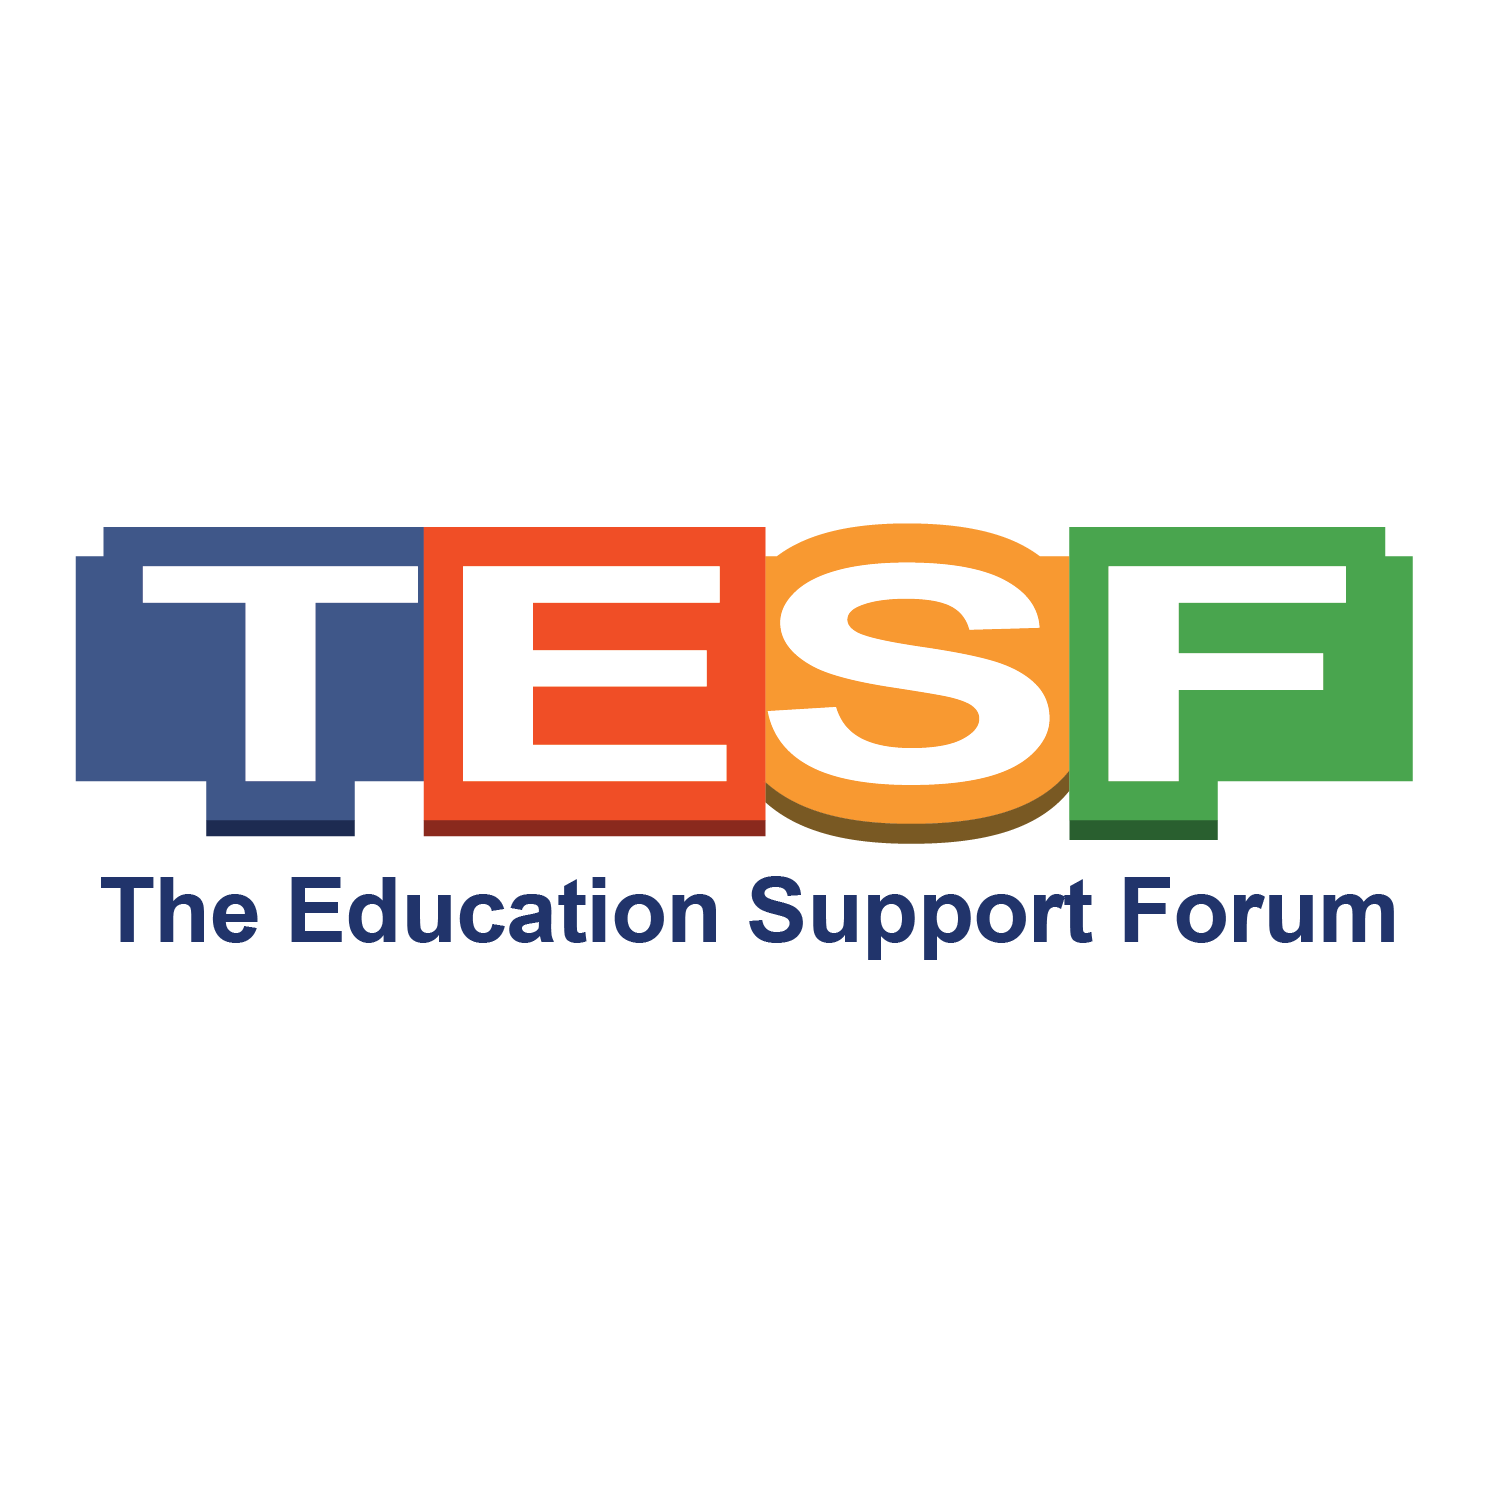 The Education Support Forum